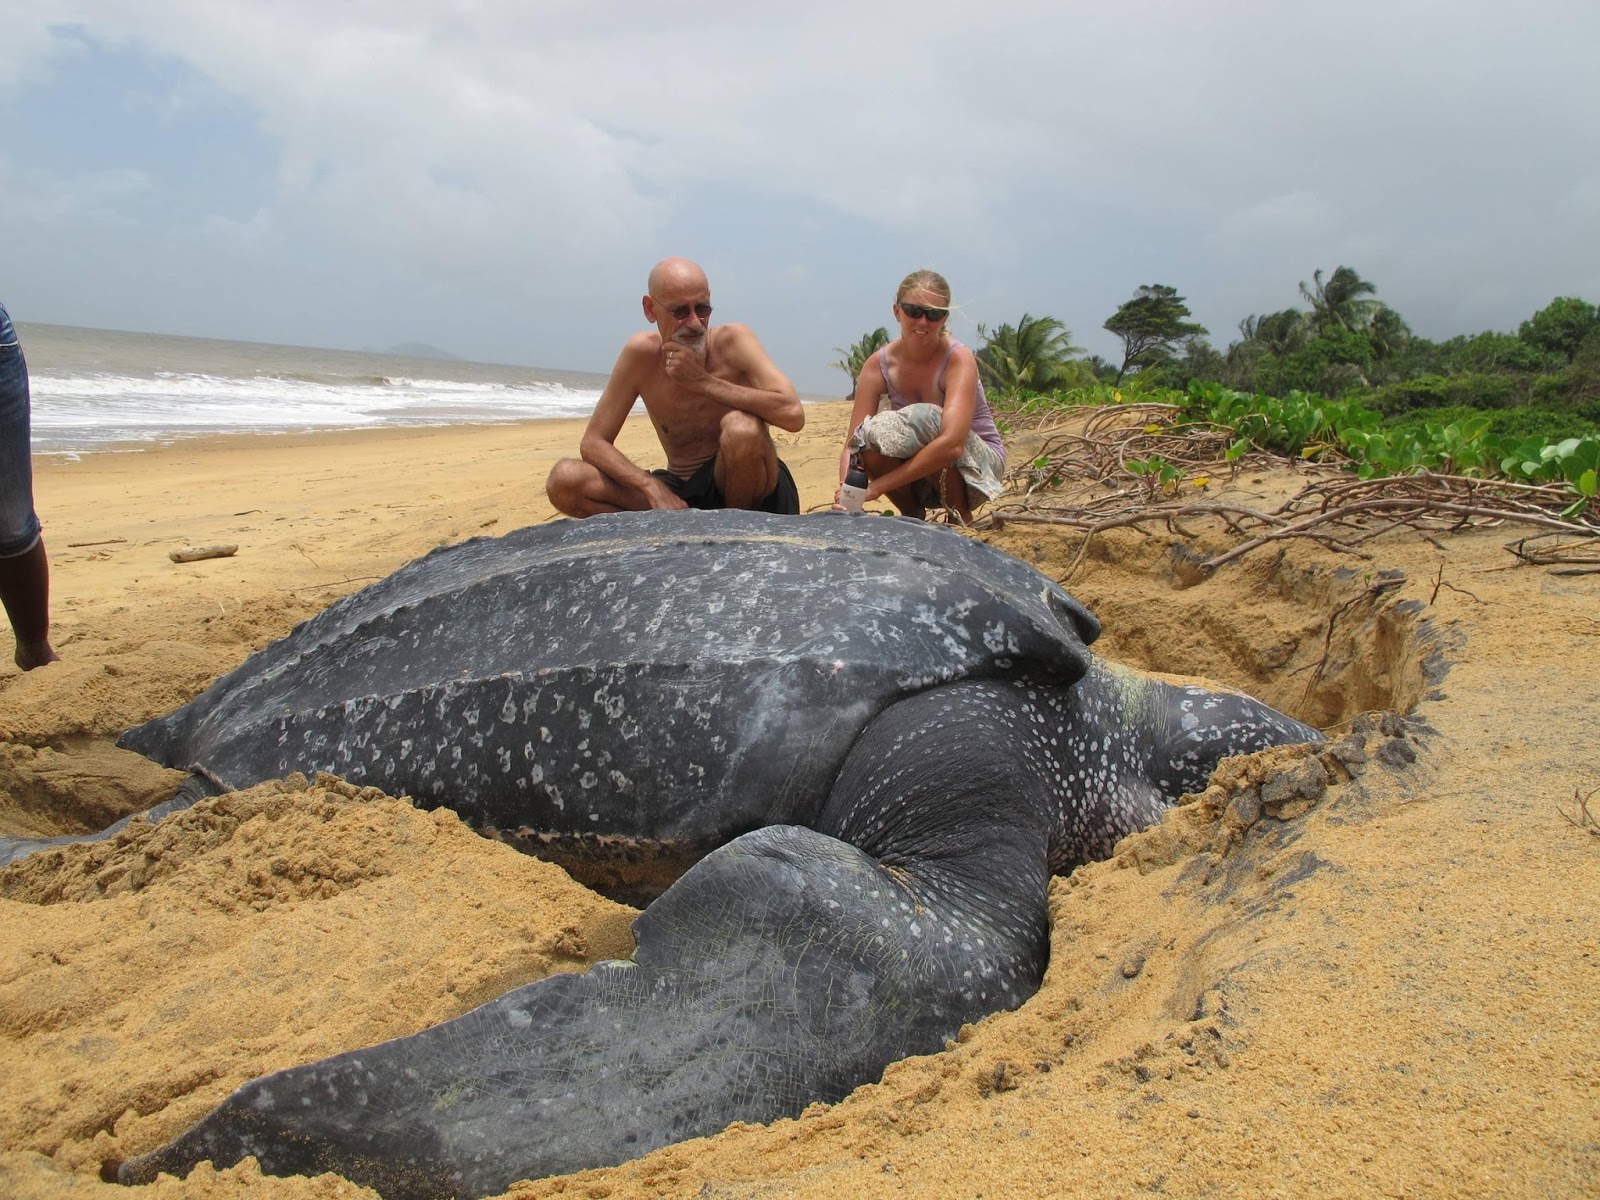 Leatherback Sea Turtles are the largest of all living turtles